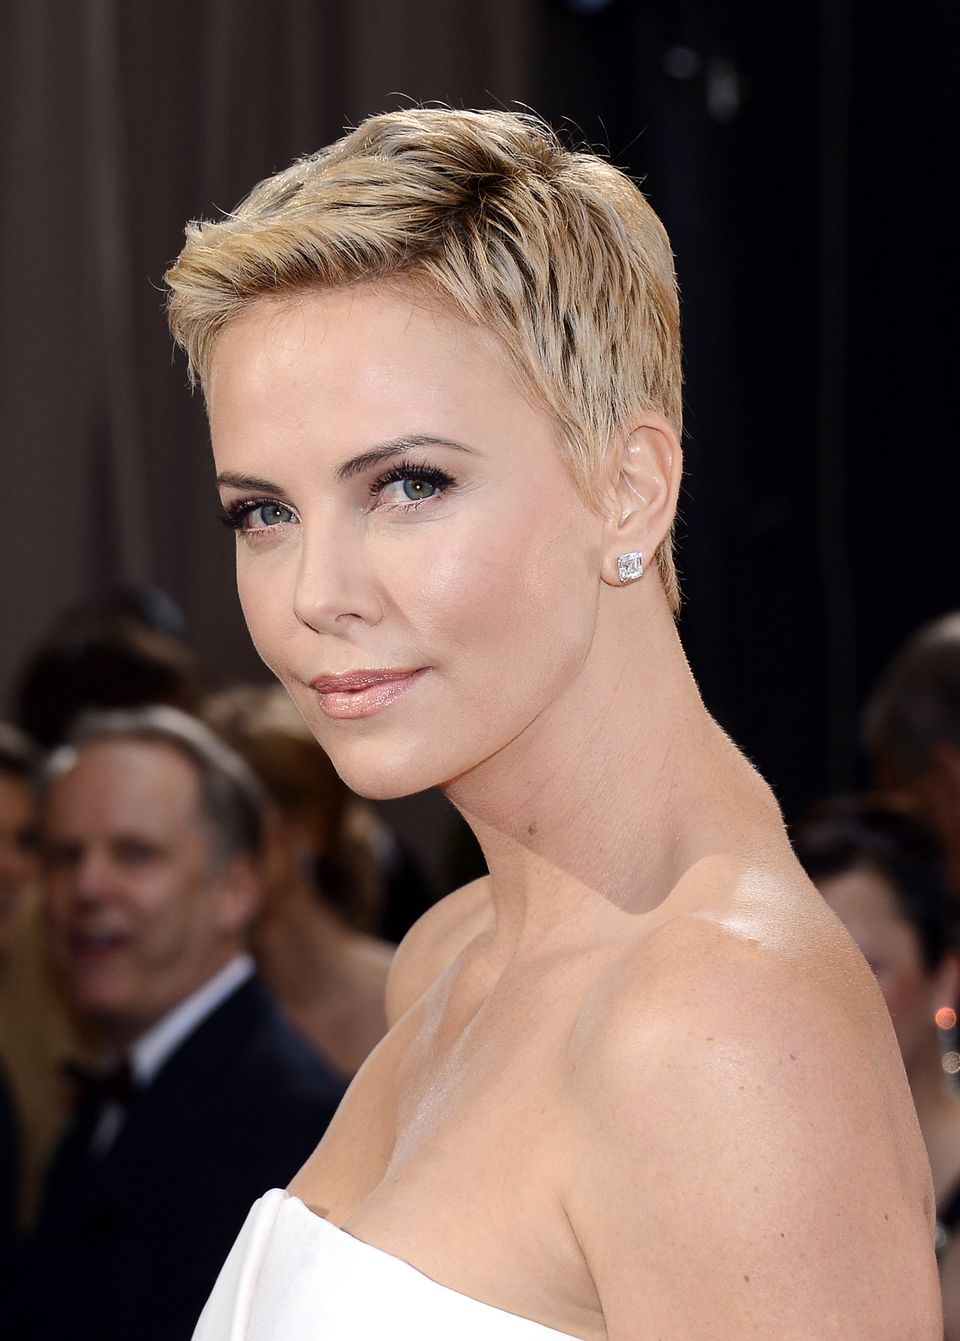 50 Of The Best Celebrity Short Haircuts For When You Need Some Pixie